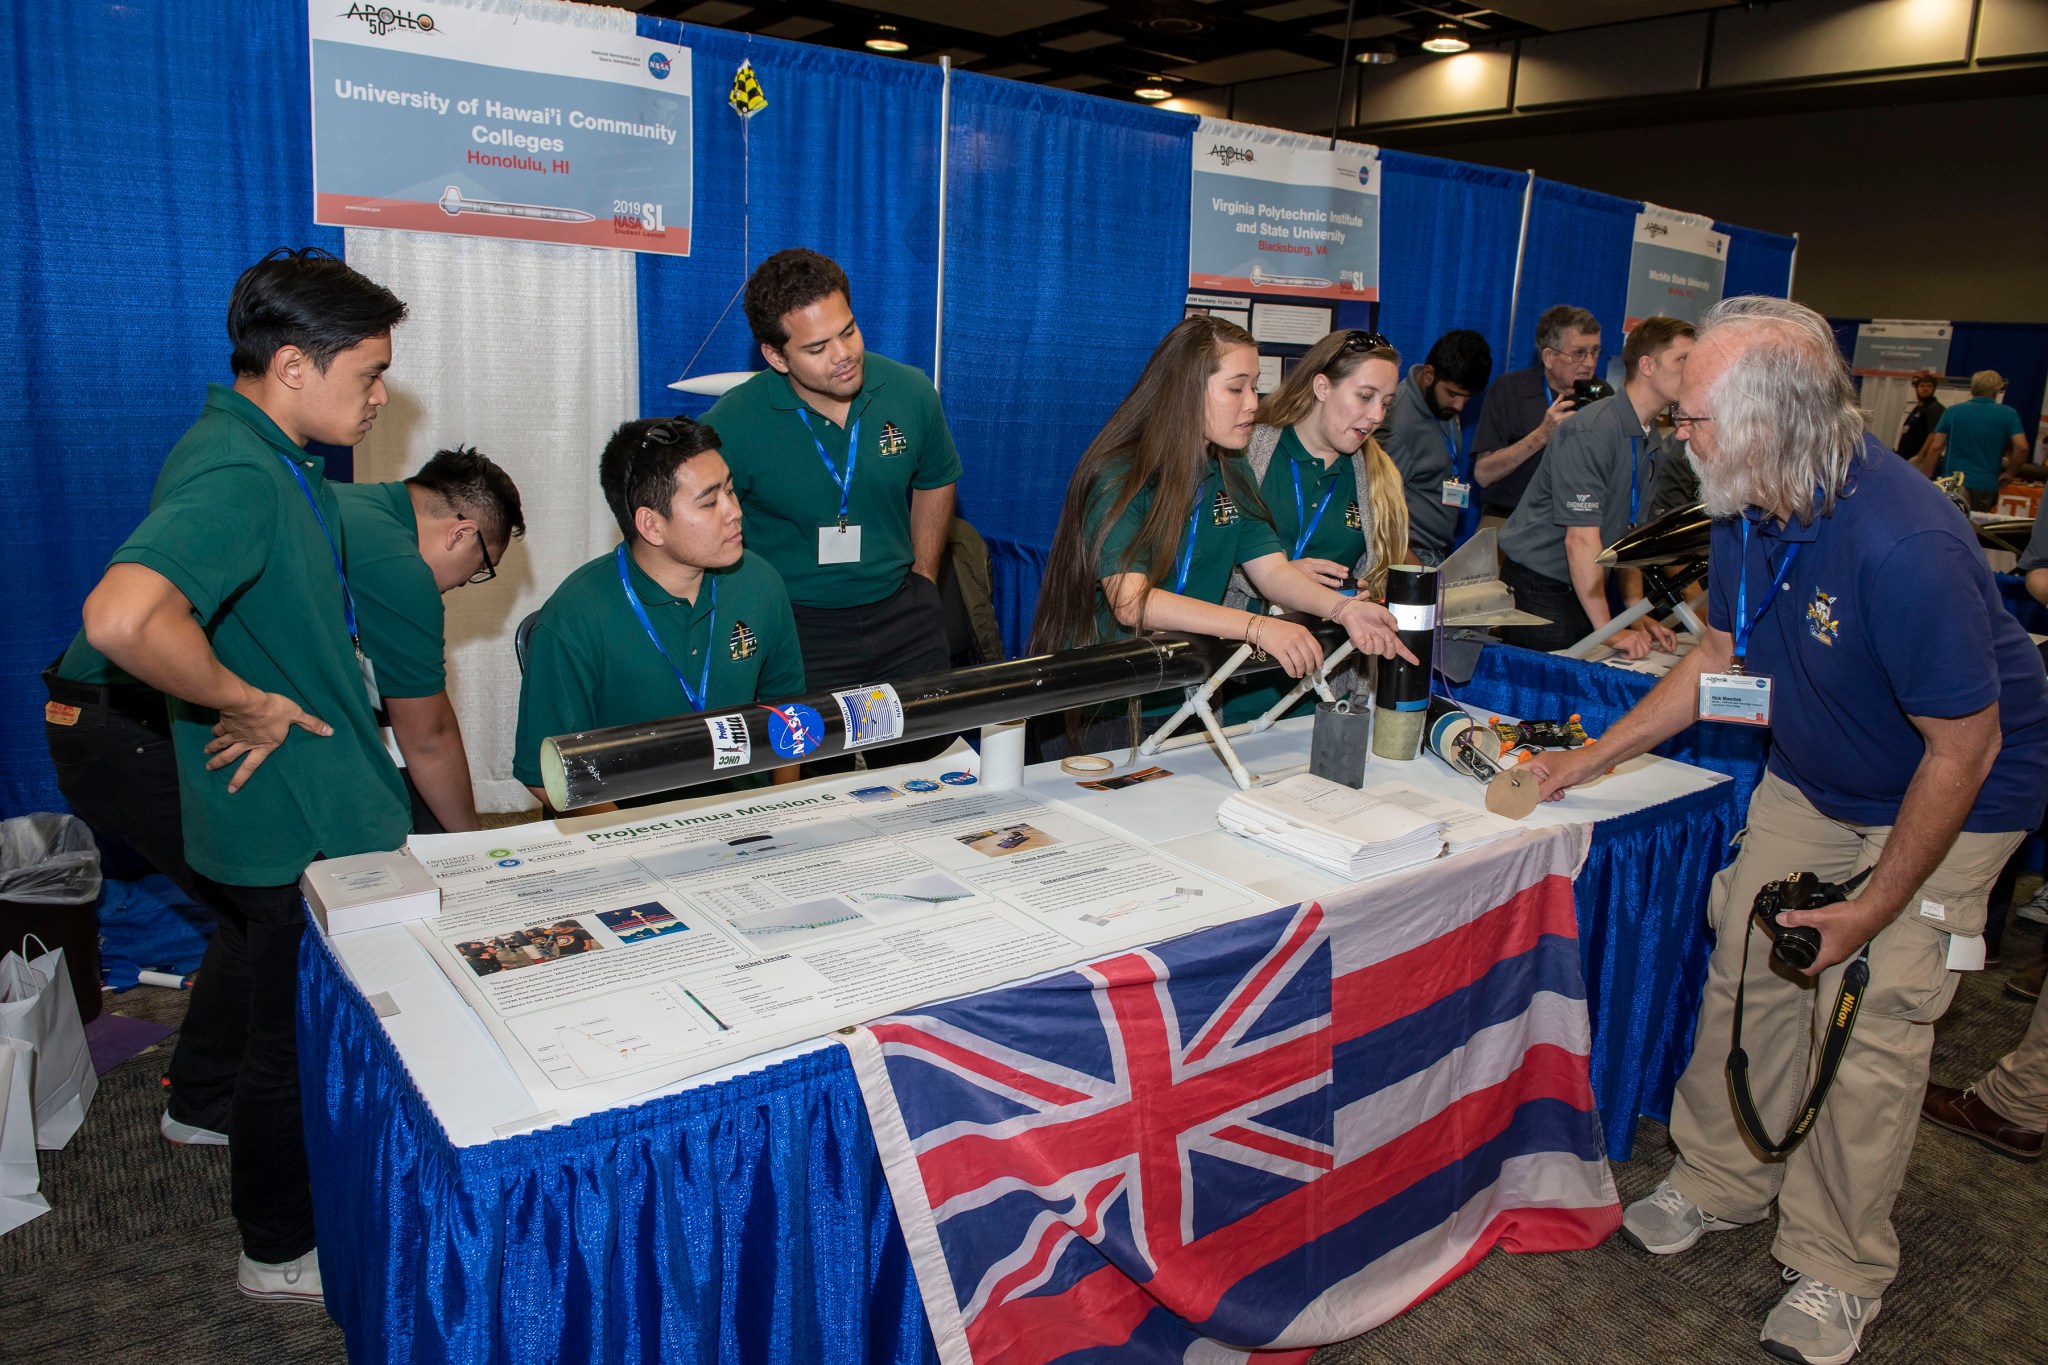 The University of Hawaii Community Colleges team shows off their rocket and payload at the annual Student Launch Rocket Fair.